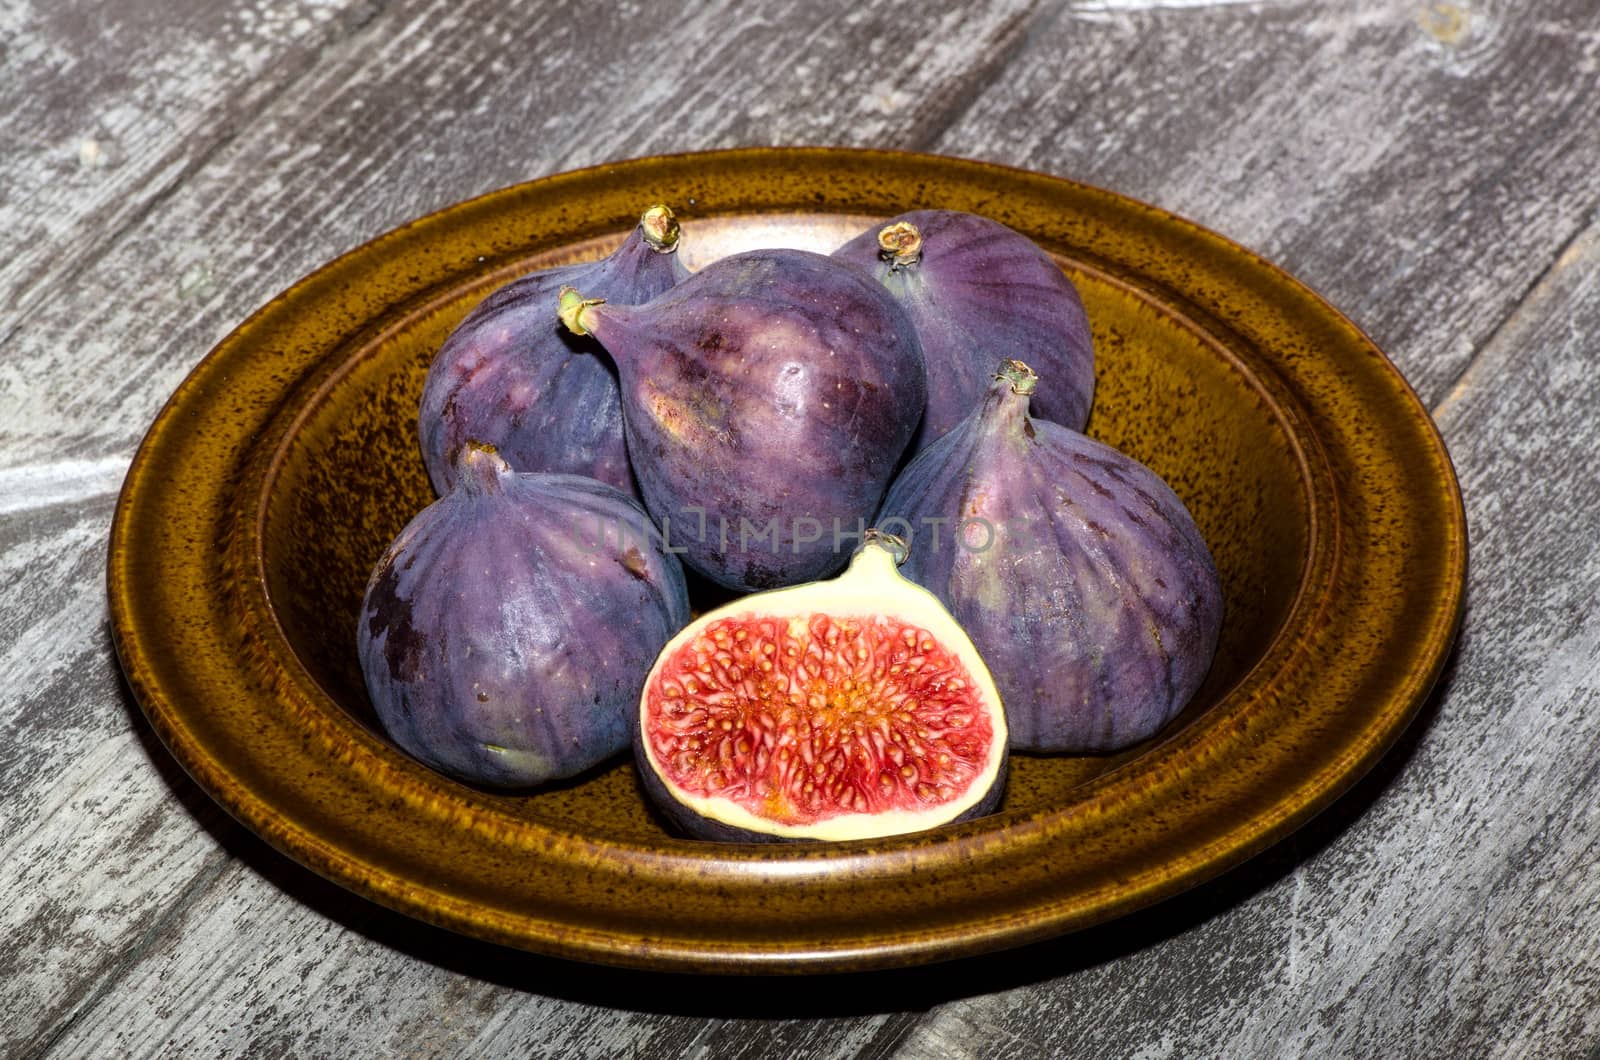 Figs by maisicon